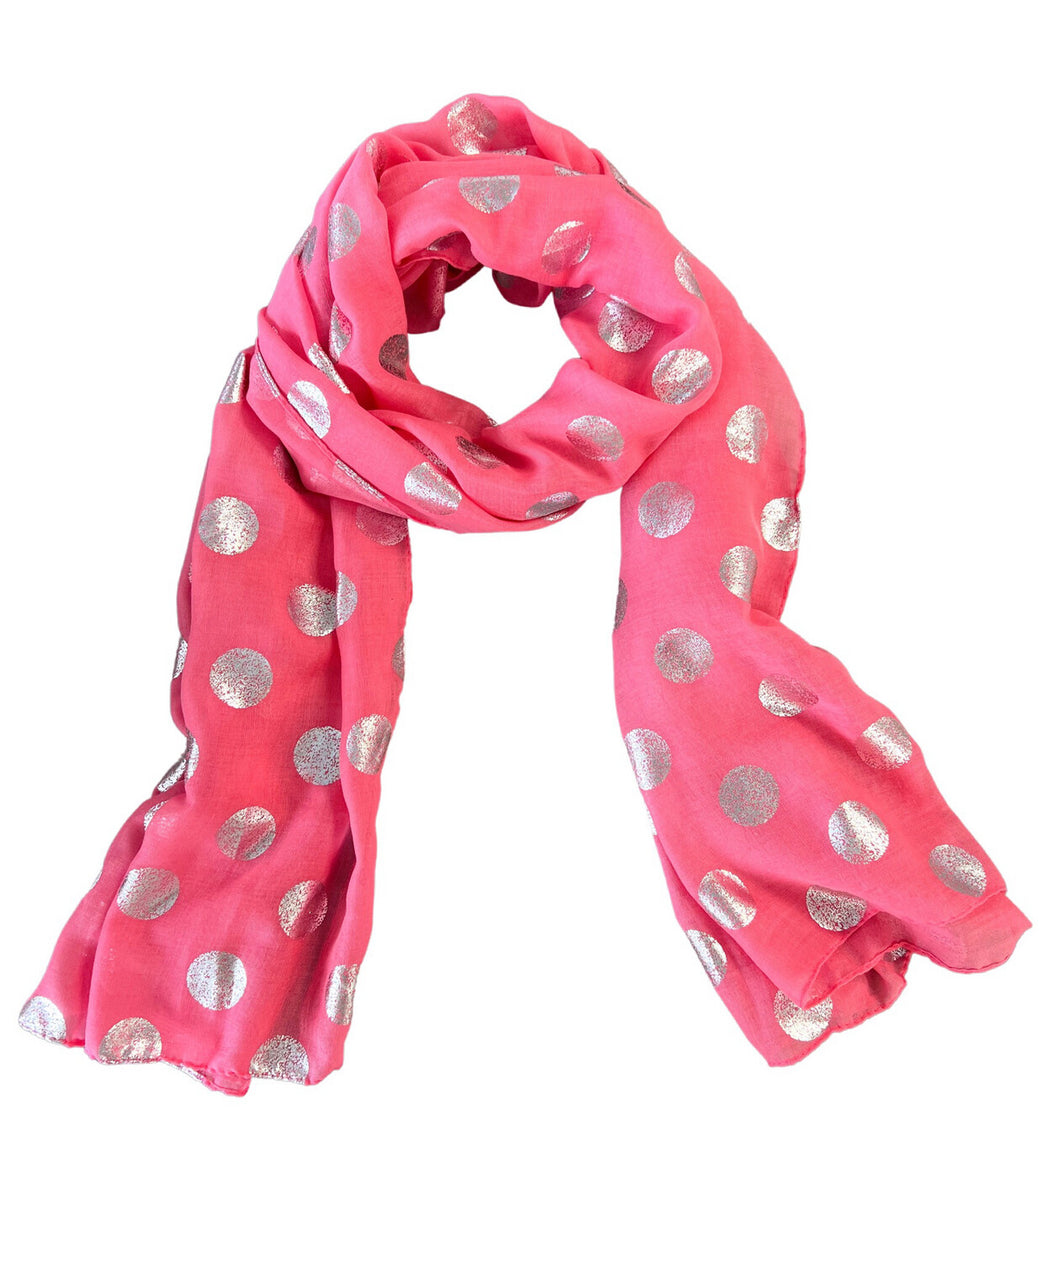 Scarf - Polka Dots with Frayed Edges - Silver on Fuchsia